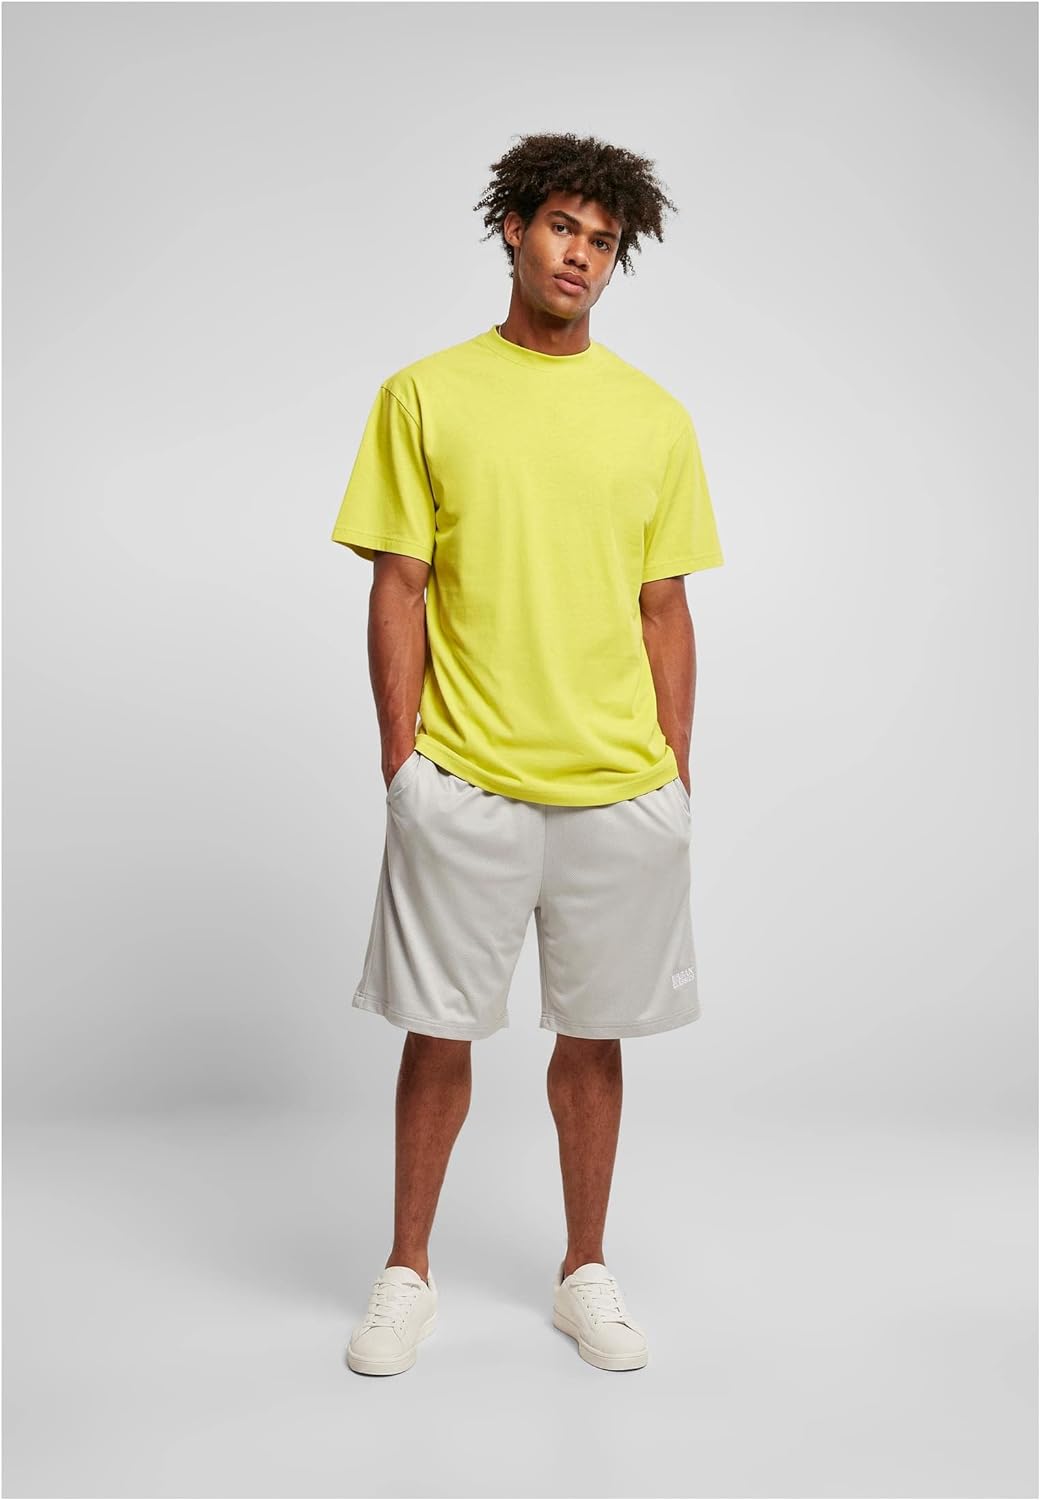 Urban Classics Mens Tall Tee Oversized T-Shirt Oversized Short Sleeves T-Shirt with Dropped Shoulders, 100% Jersey Cotton (pack of 1)